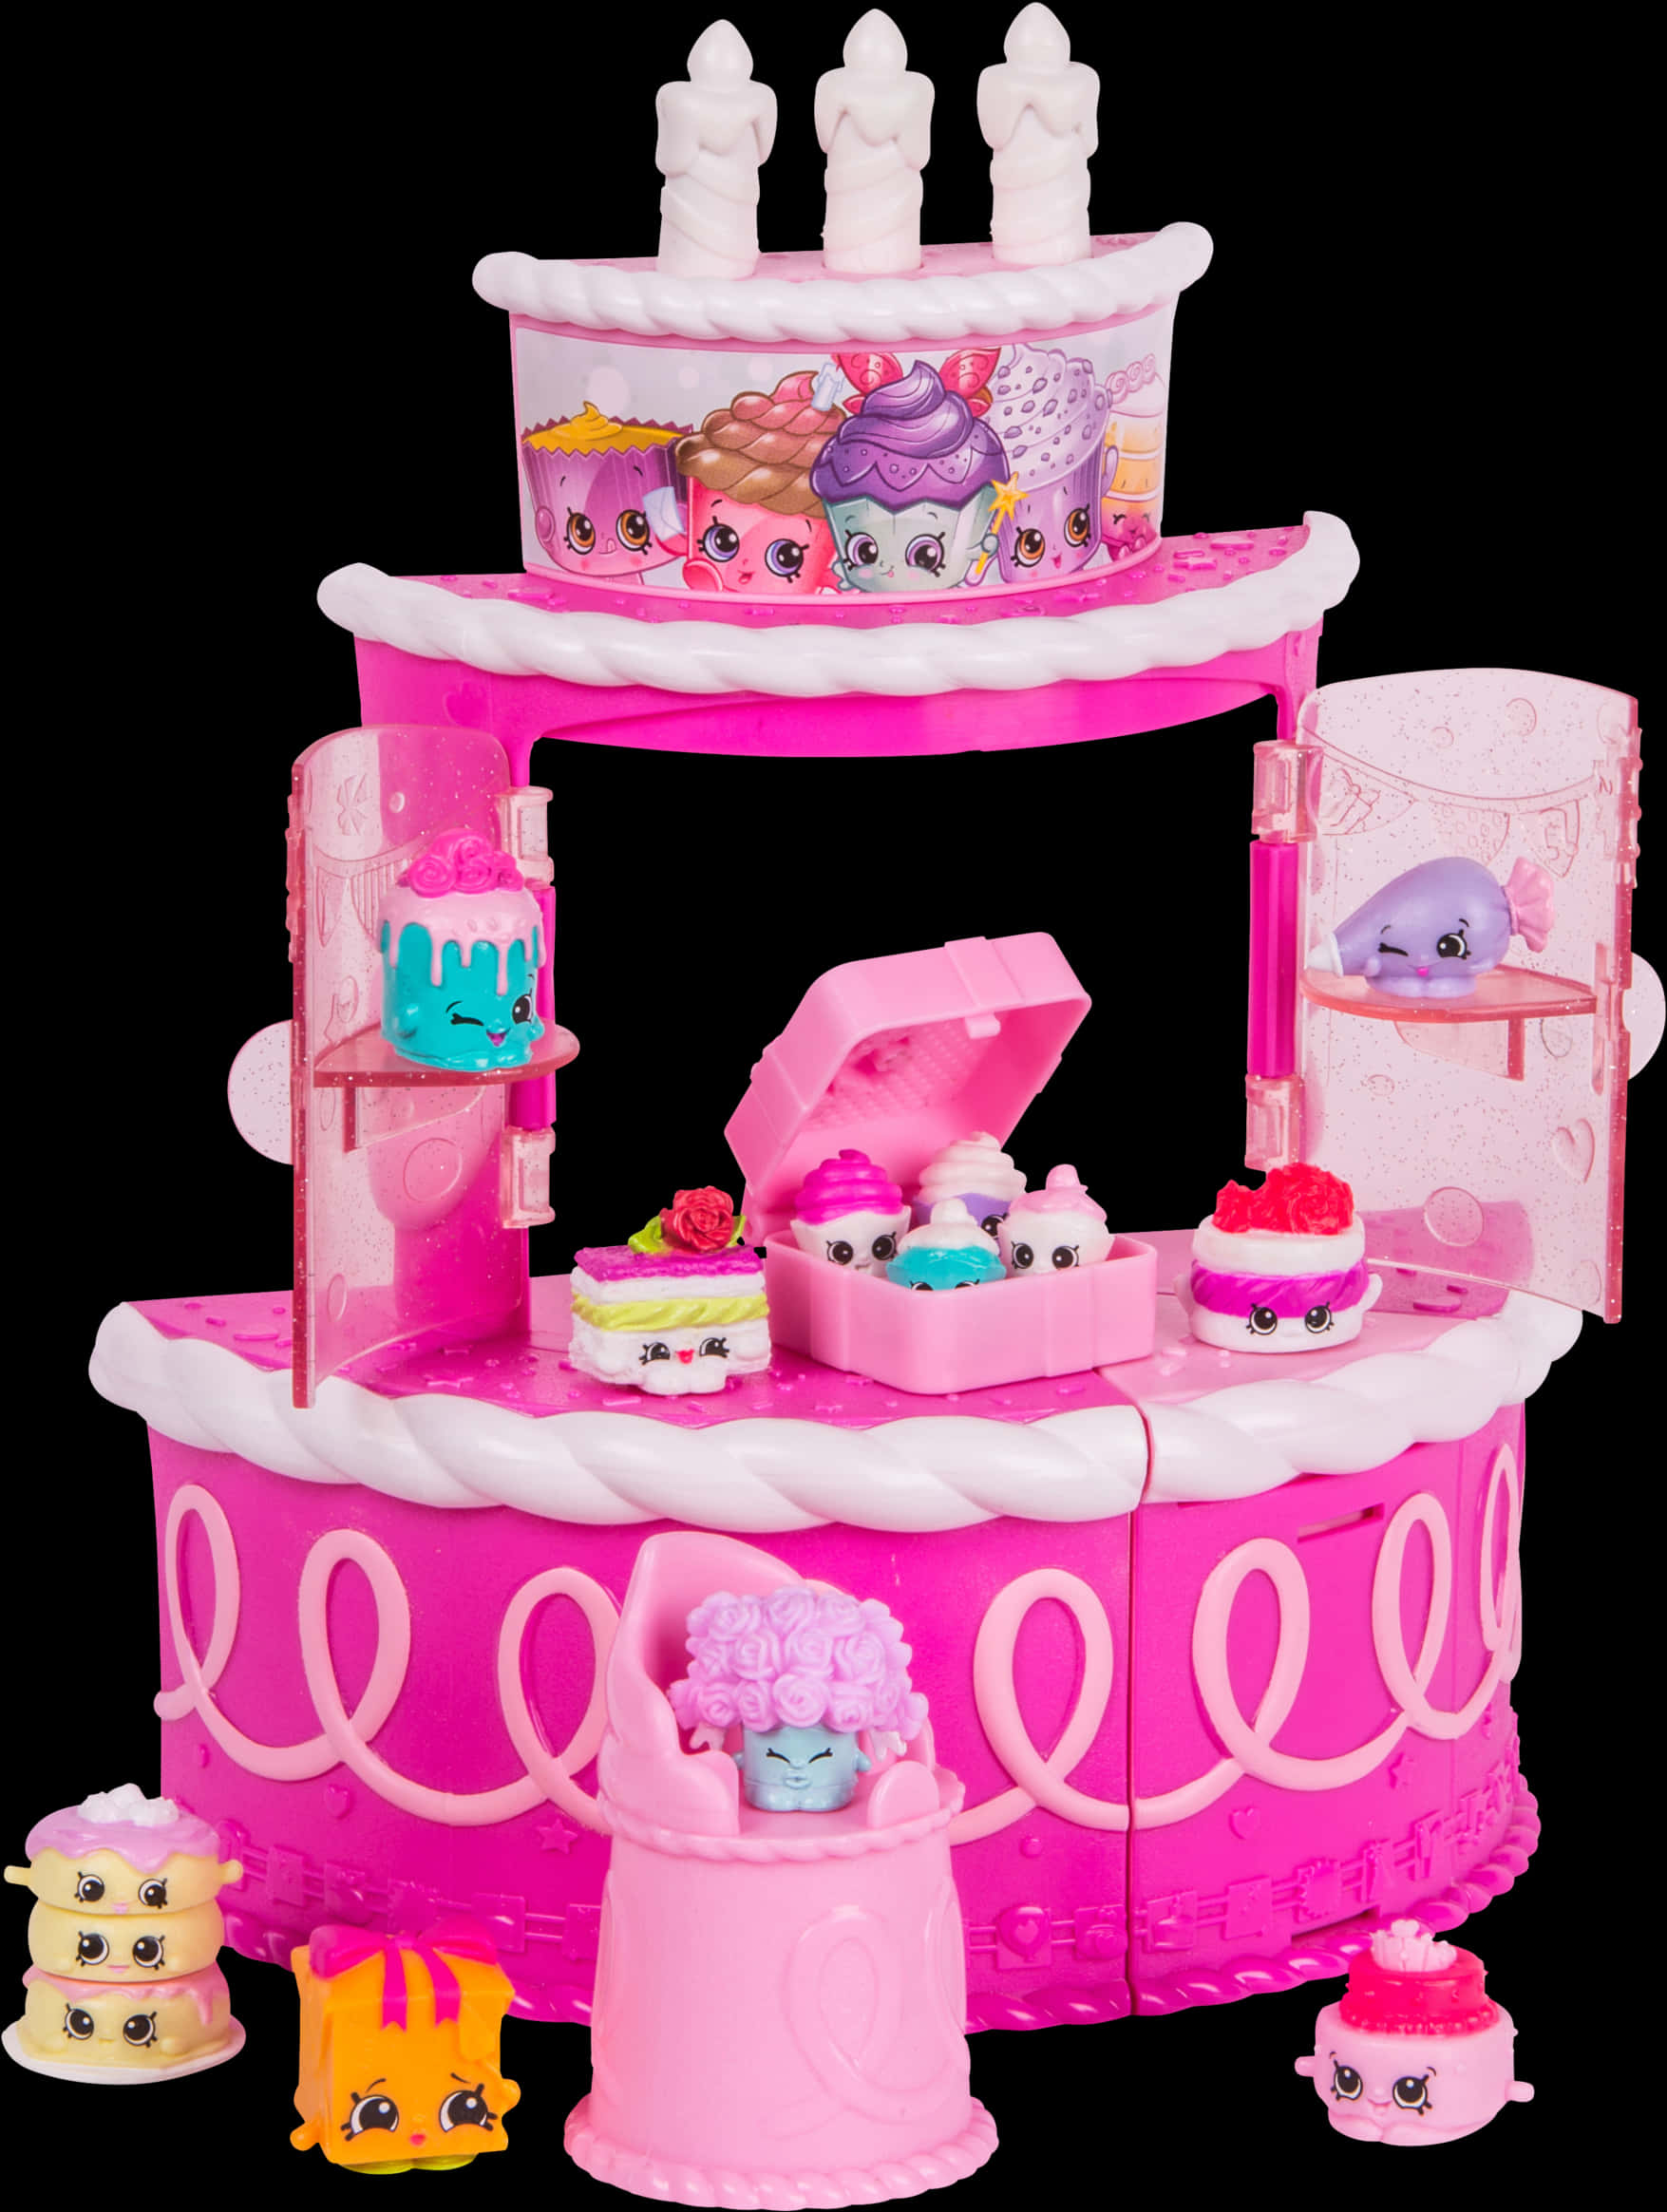 A Toy Cake With Different Types Of Food